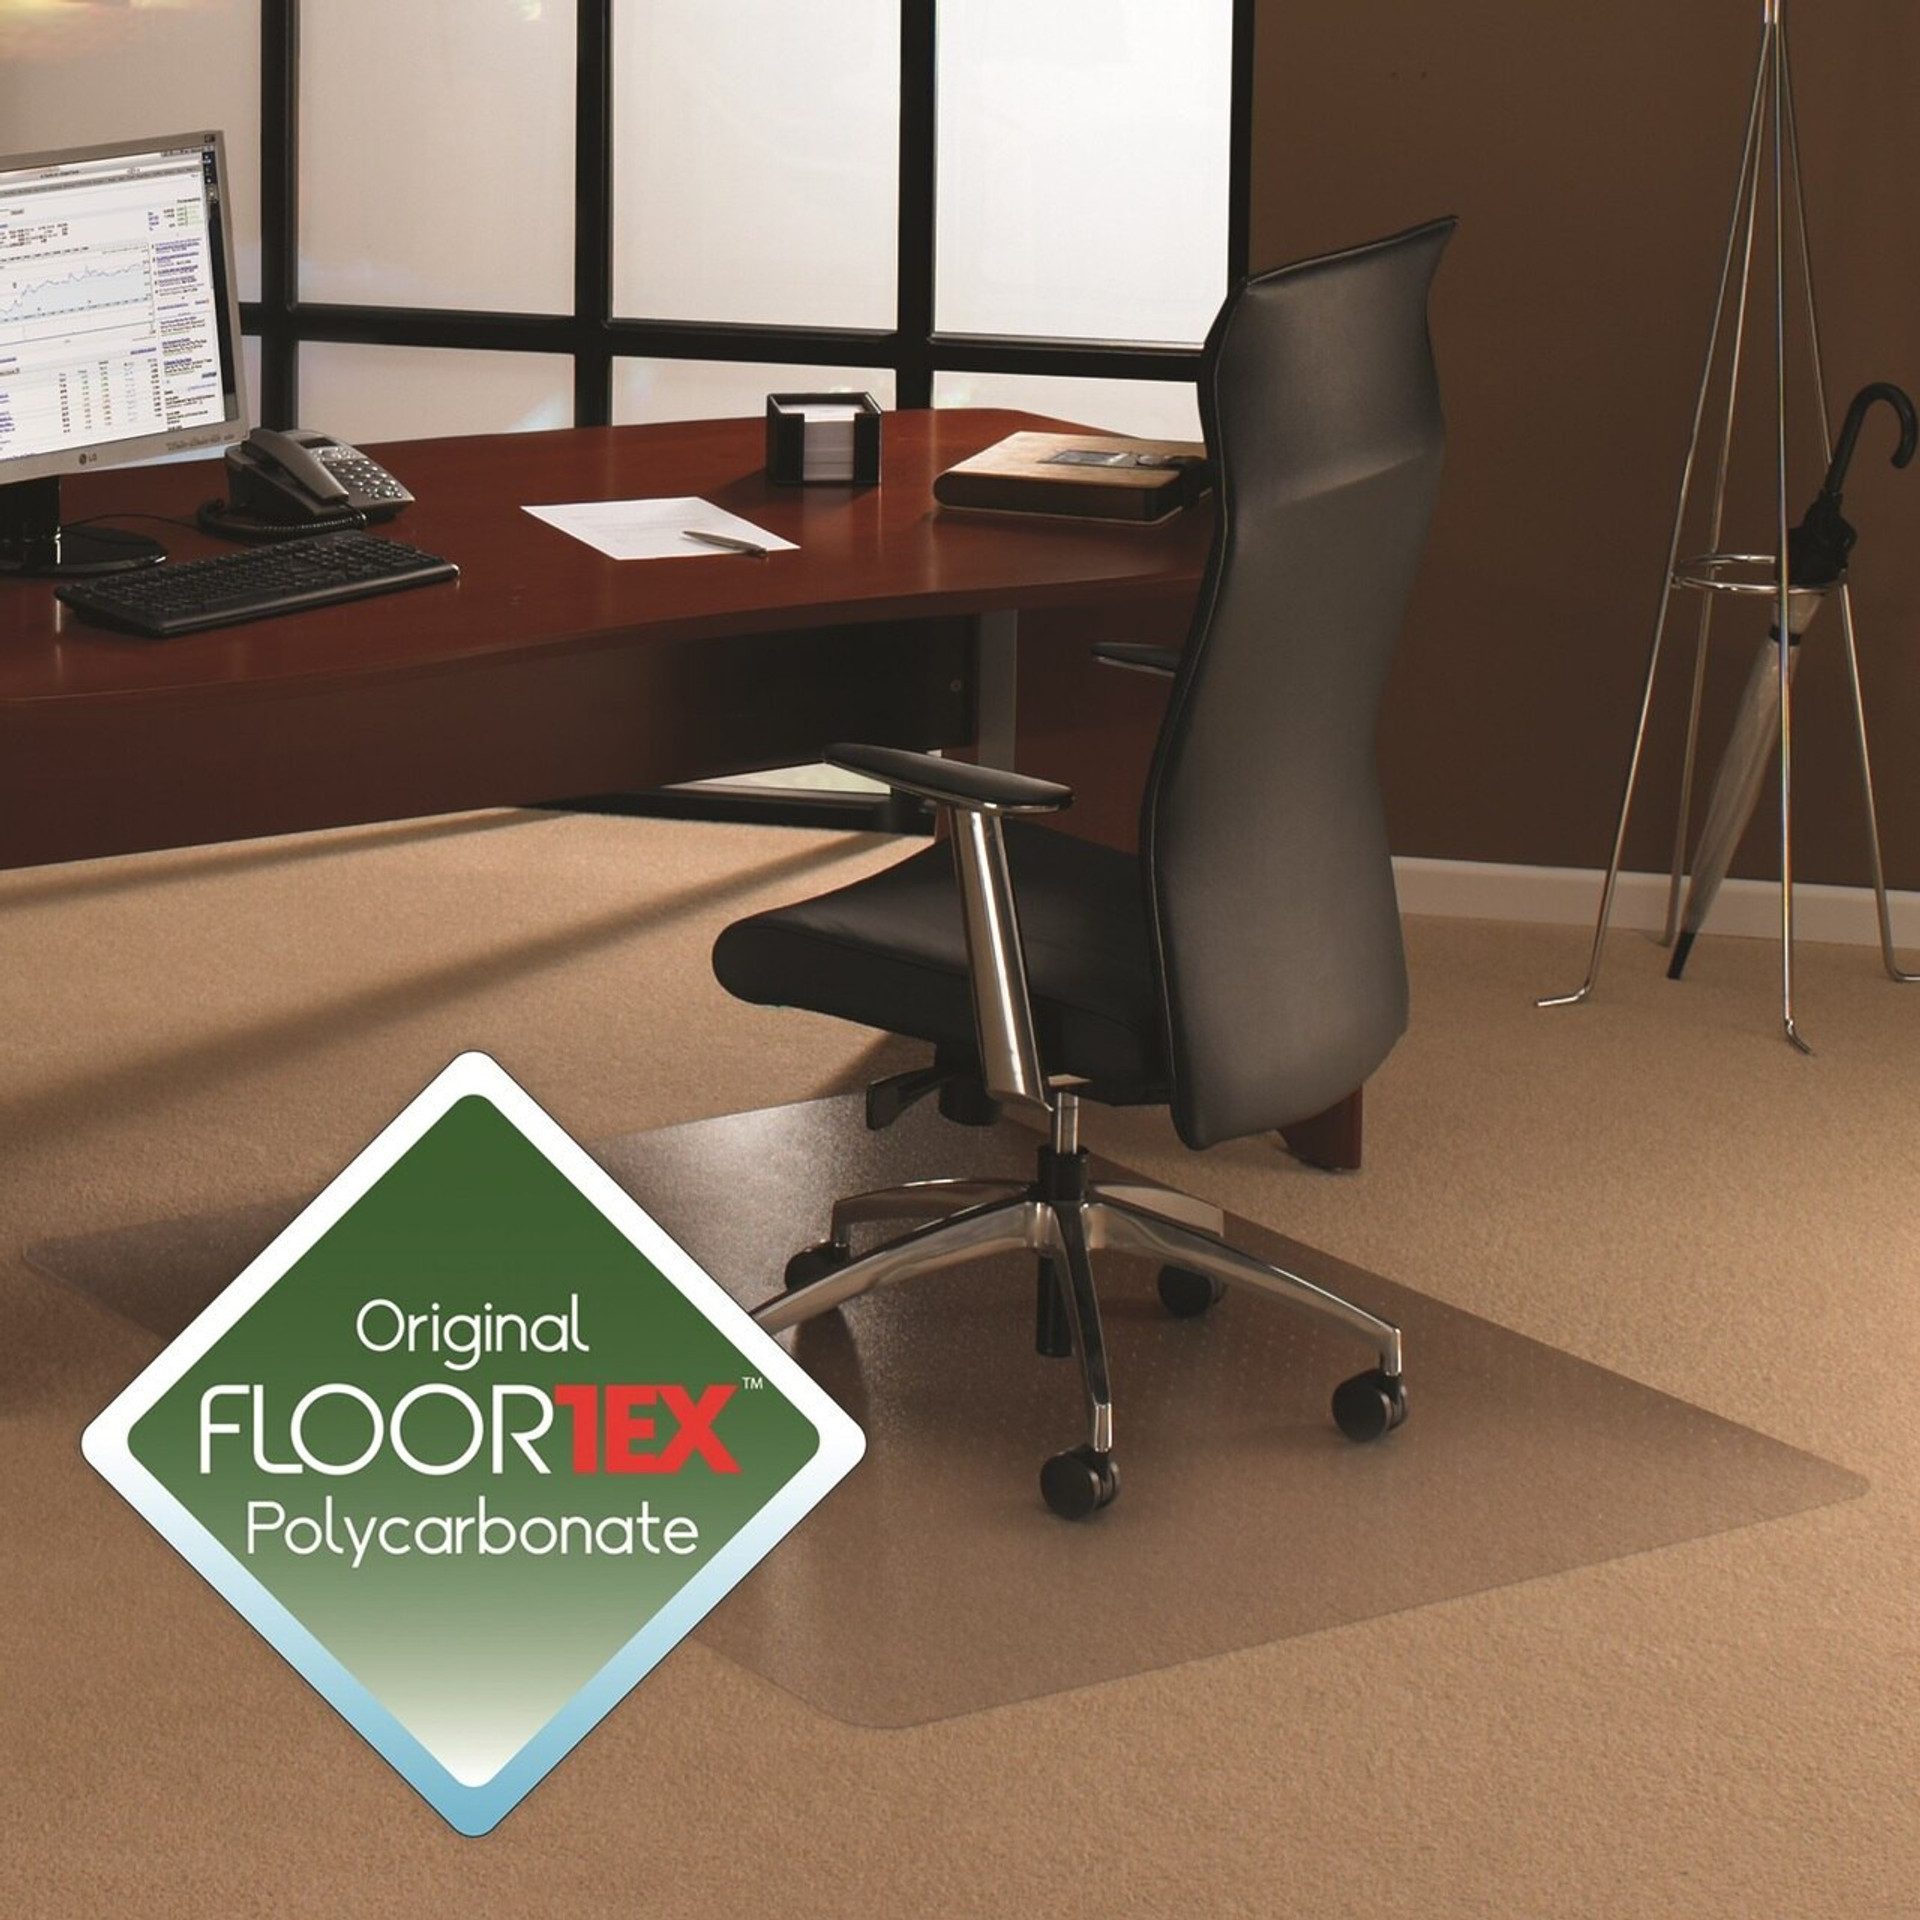 Cleartex Ultimat Chair Mat For Low And Medium Pile Carpets Up To 12 Or Clear Polycarbonate Or Rectangular Carpet Protector Or Multiple Sizes  94882.1688992485 ?c=2